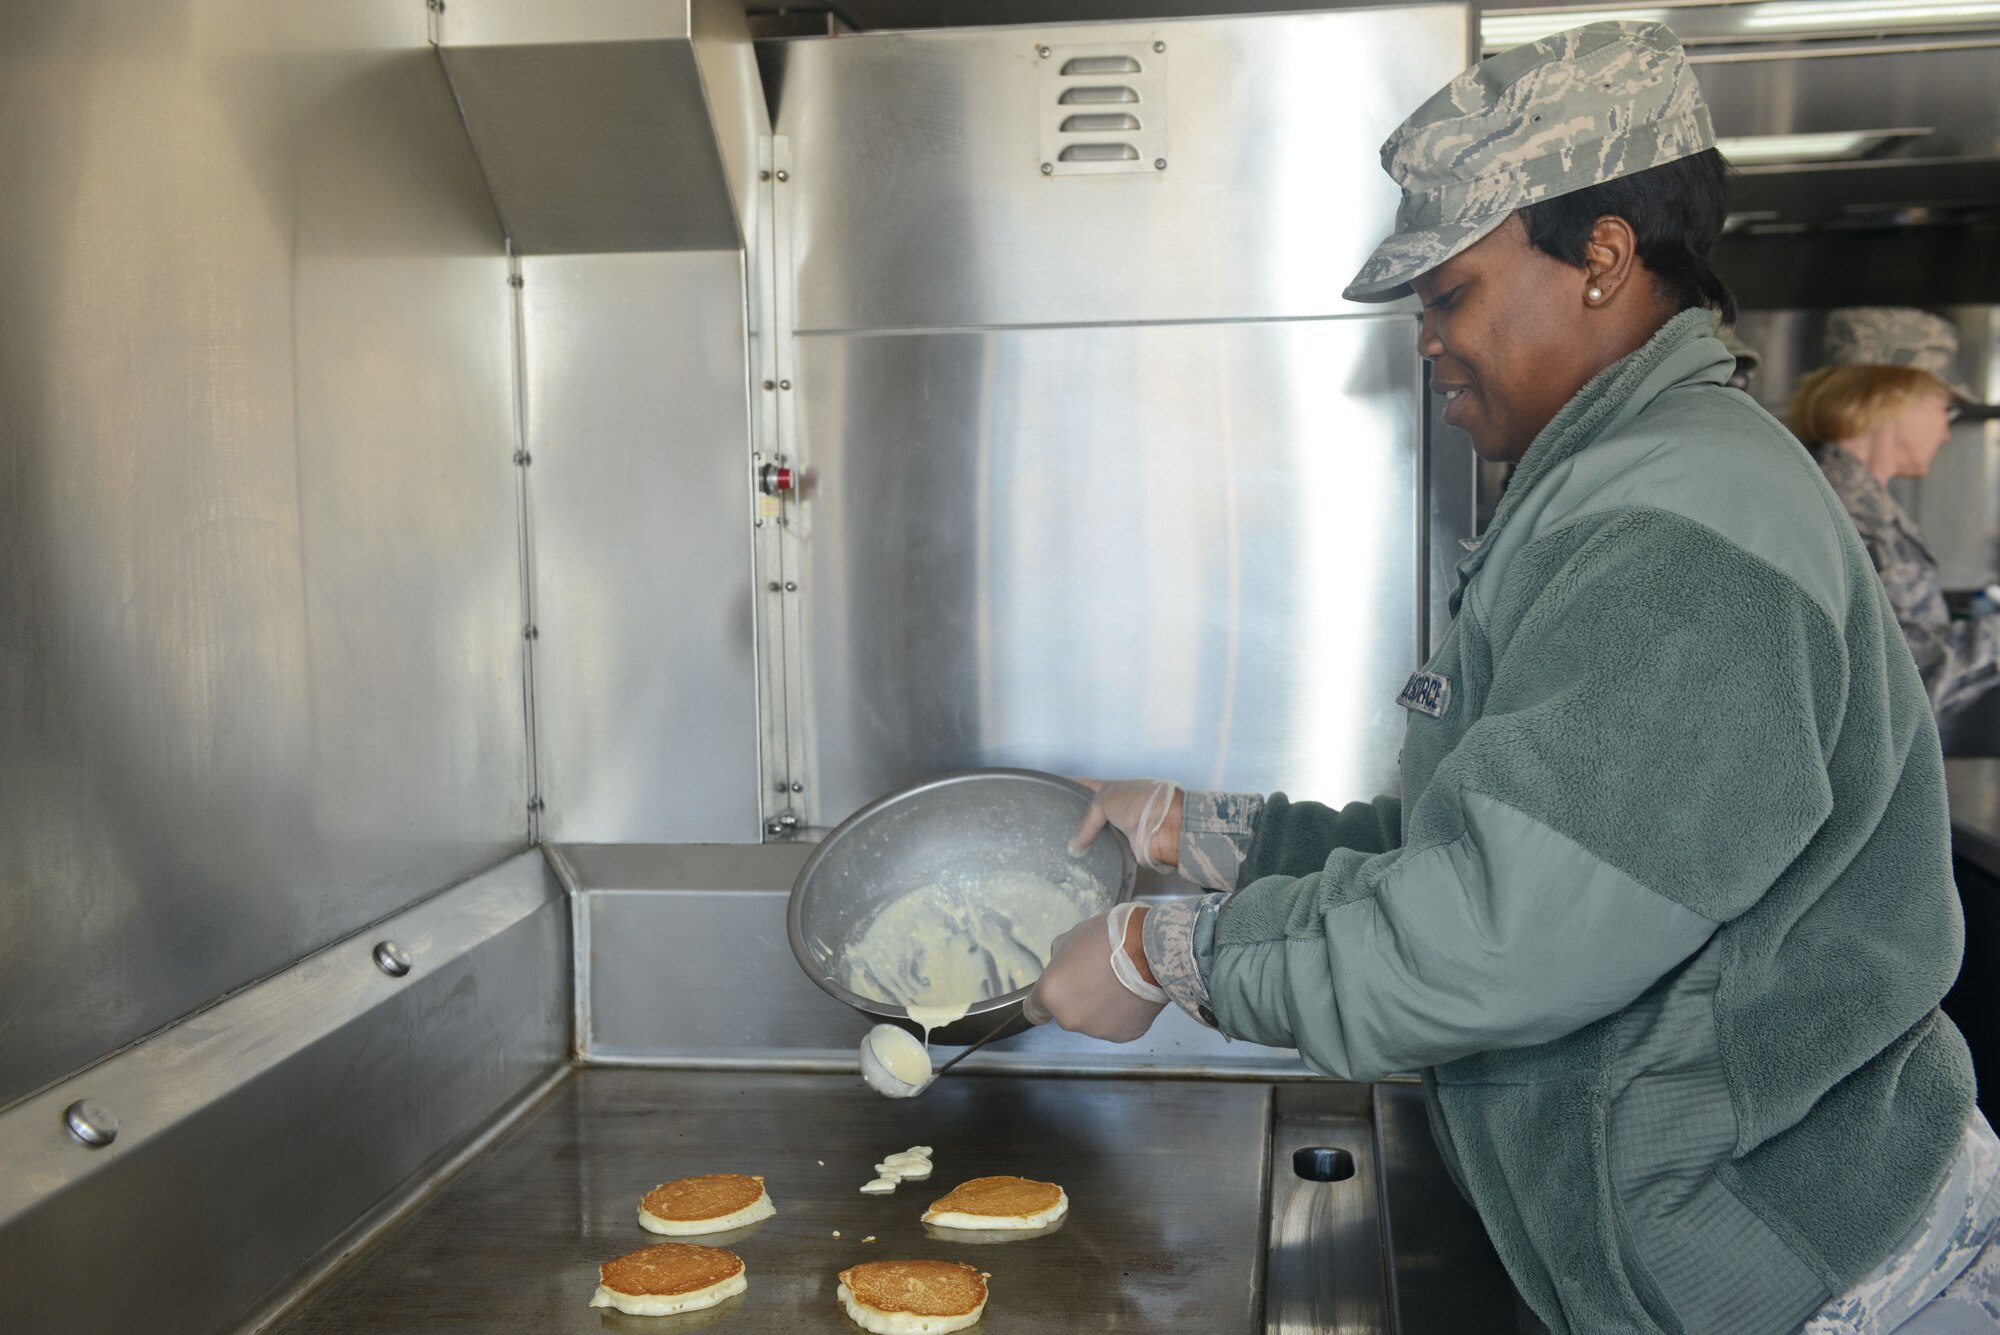 U.S. Air Force Senior Airman Deatrice Peake, 116th Force Support Squadron, Services Flight (FSS/FSV), Georgia Air National Guard, Robins Air Force Base, Ga., cooks pancakes on a grill in a Deployable Ready Mobile Kitchen Trailer (DRMKT) while training with the 136th FSS/FSV, Texas Air National Guard, at Naval Air Station Fort Worth Joint Reserve Base, Texas, Feb. 22, 2014. Members of the 116th FSS/FSV participated in the two-day training event in anticipation of receiving their own DRMKT in July 2014. (U.S. Air National Guard photos by Master Sgt. Charles Hatton/Released)